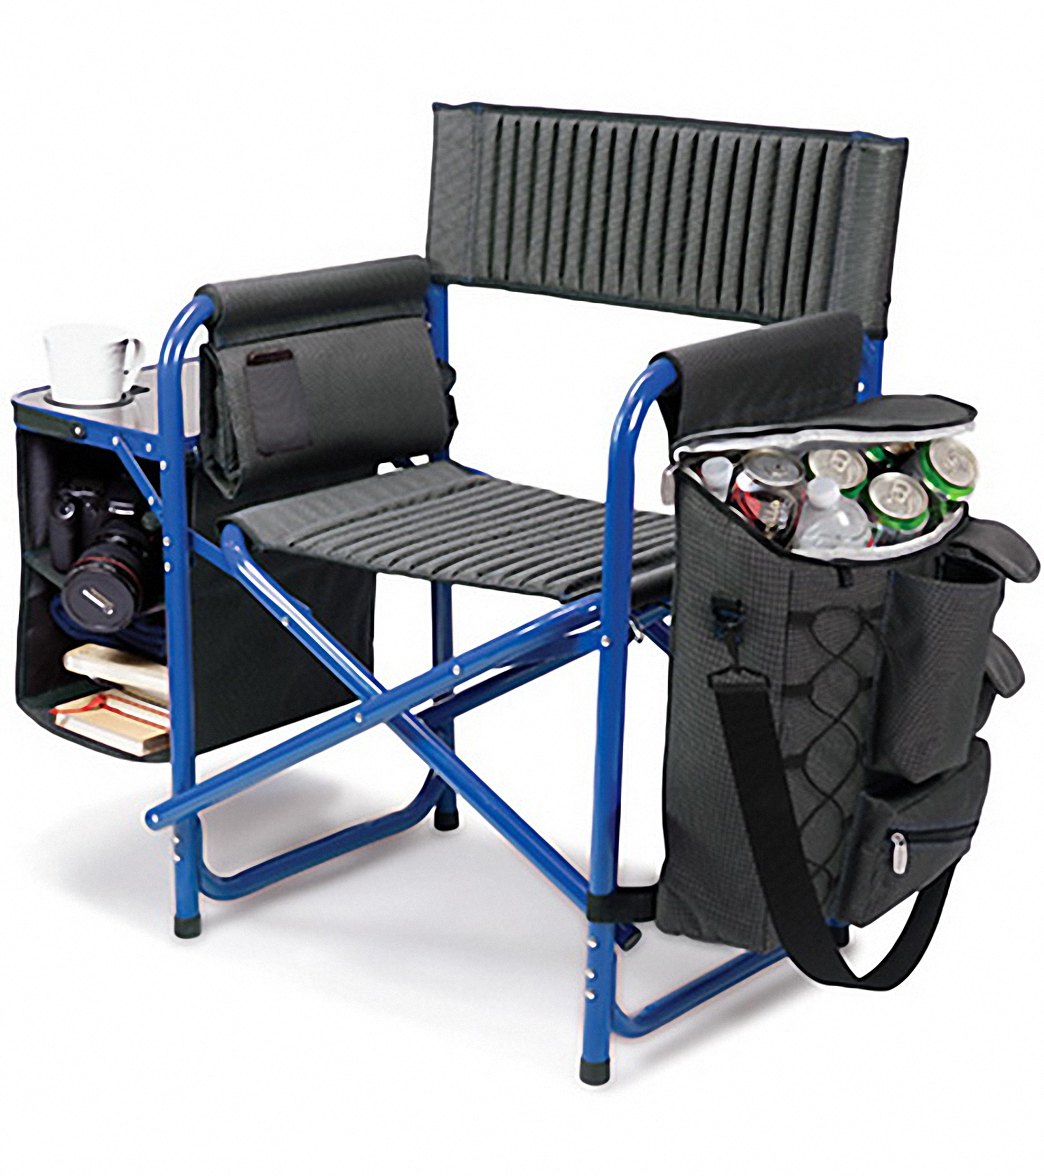 Picnic Time Picnic Fusion Backpack Cooler Chair - Blue - Swimoutlet.com